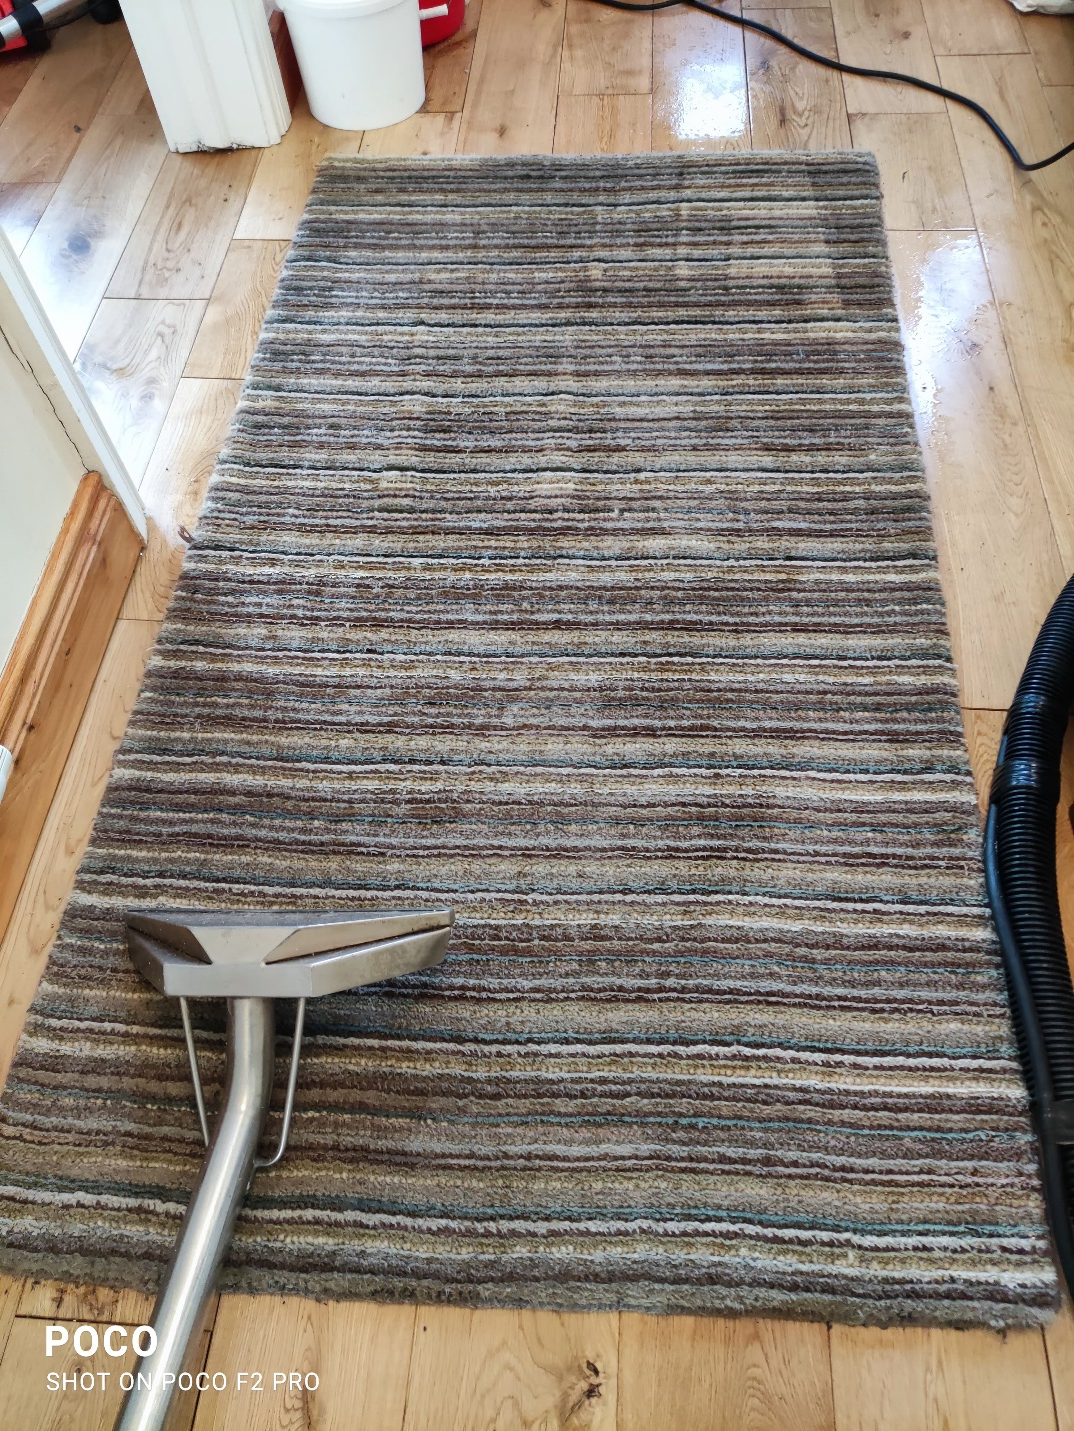 //www.sandyfordcarpetcleaning.ie/wp-content/uploads/2017/07/Picture1-3.png